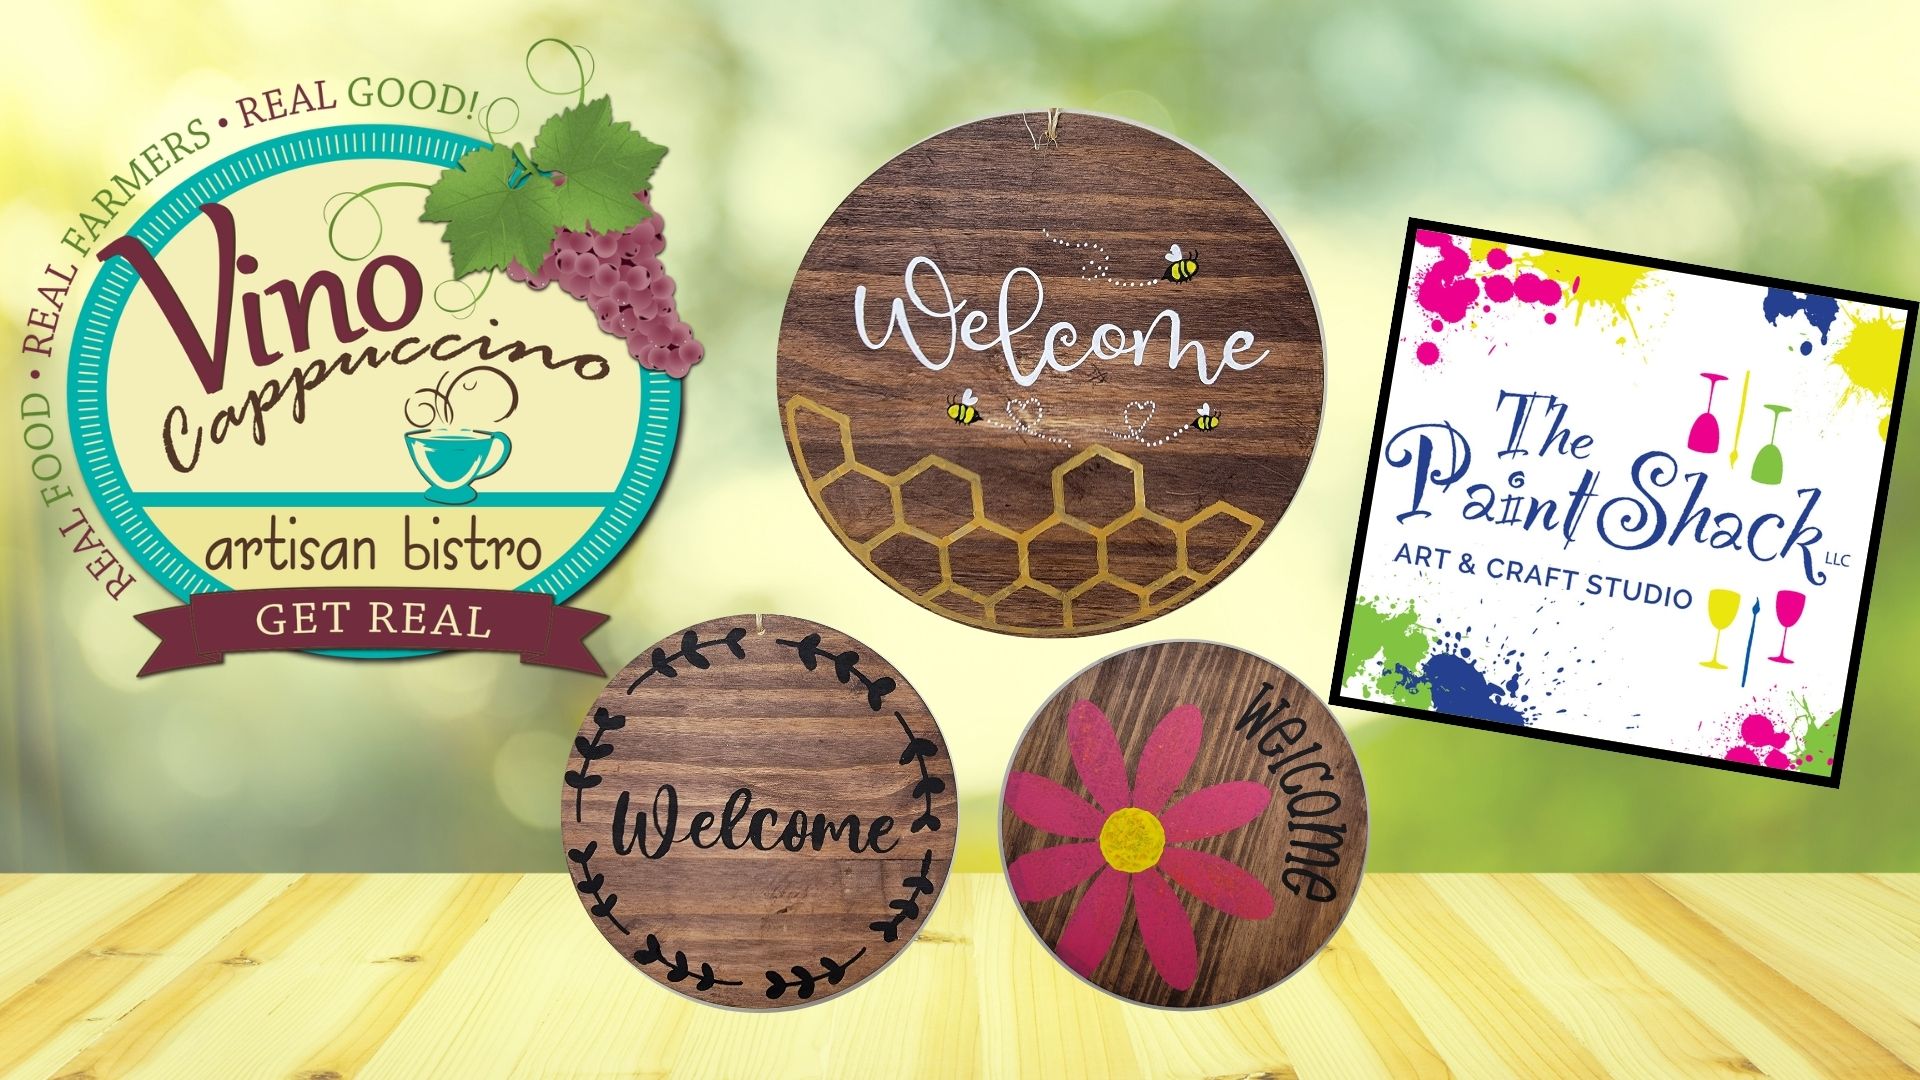 Welcome Wood Signs- Vino Cappuccino